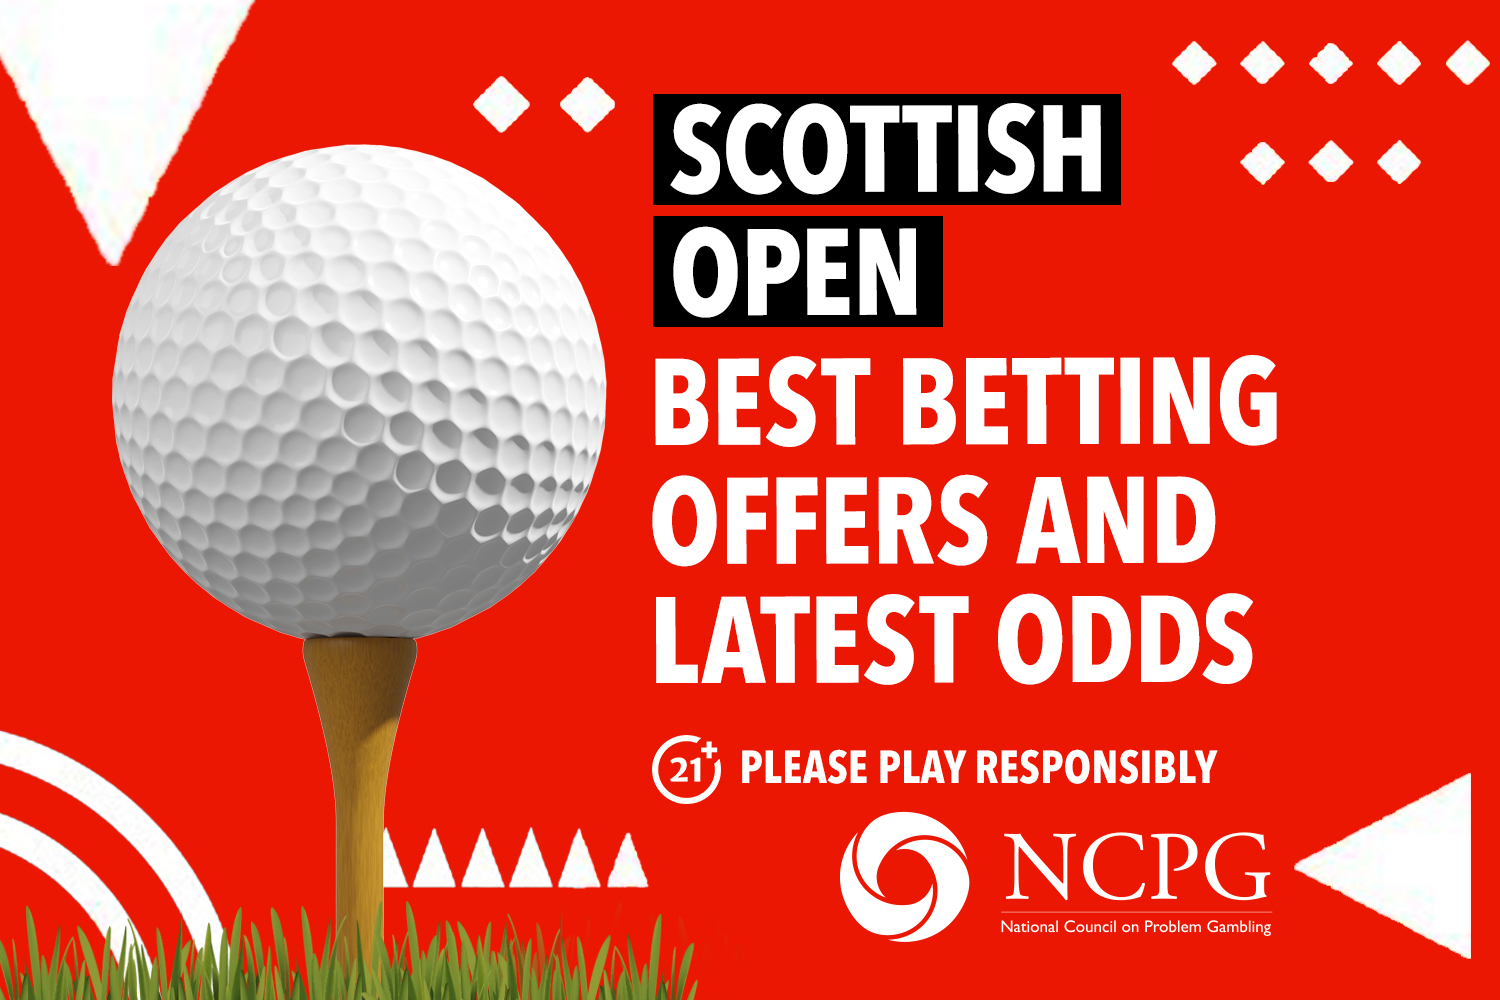 Photo: betting odds for scottish open golf